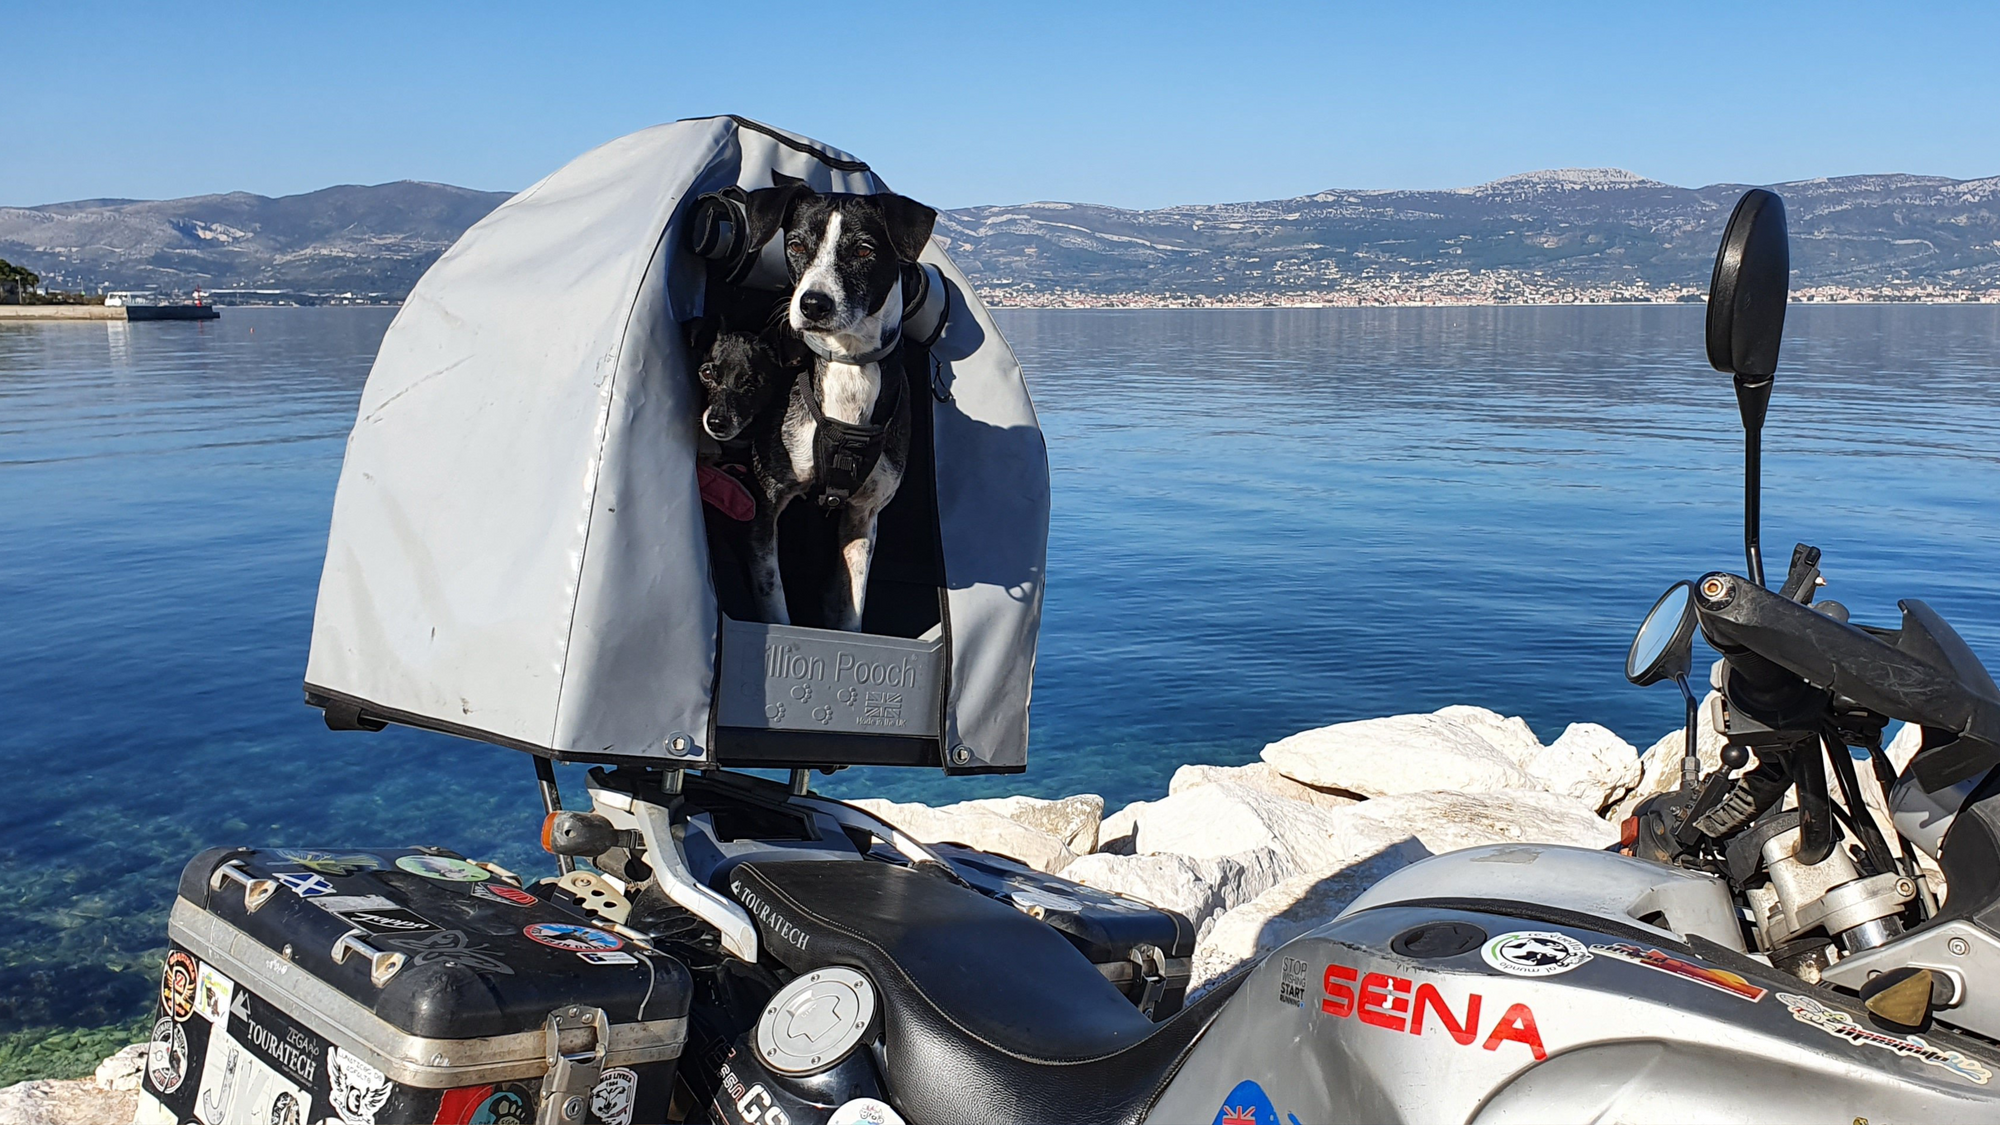 Pillion Pooch Motorcycle Dog Carrier on a BMW 650GS mounted with U-bolts with Touratech 45L panniers. Photo by The Pack Track of their dogs Weeti and Shadow in Croatia.